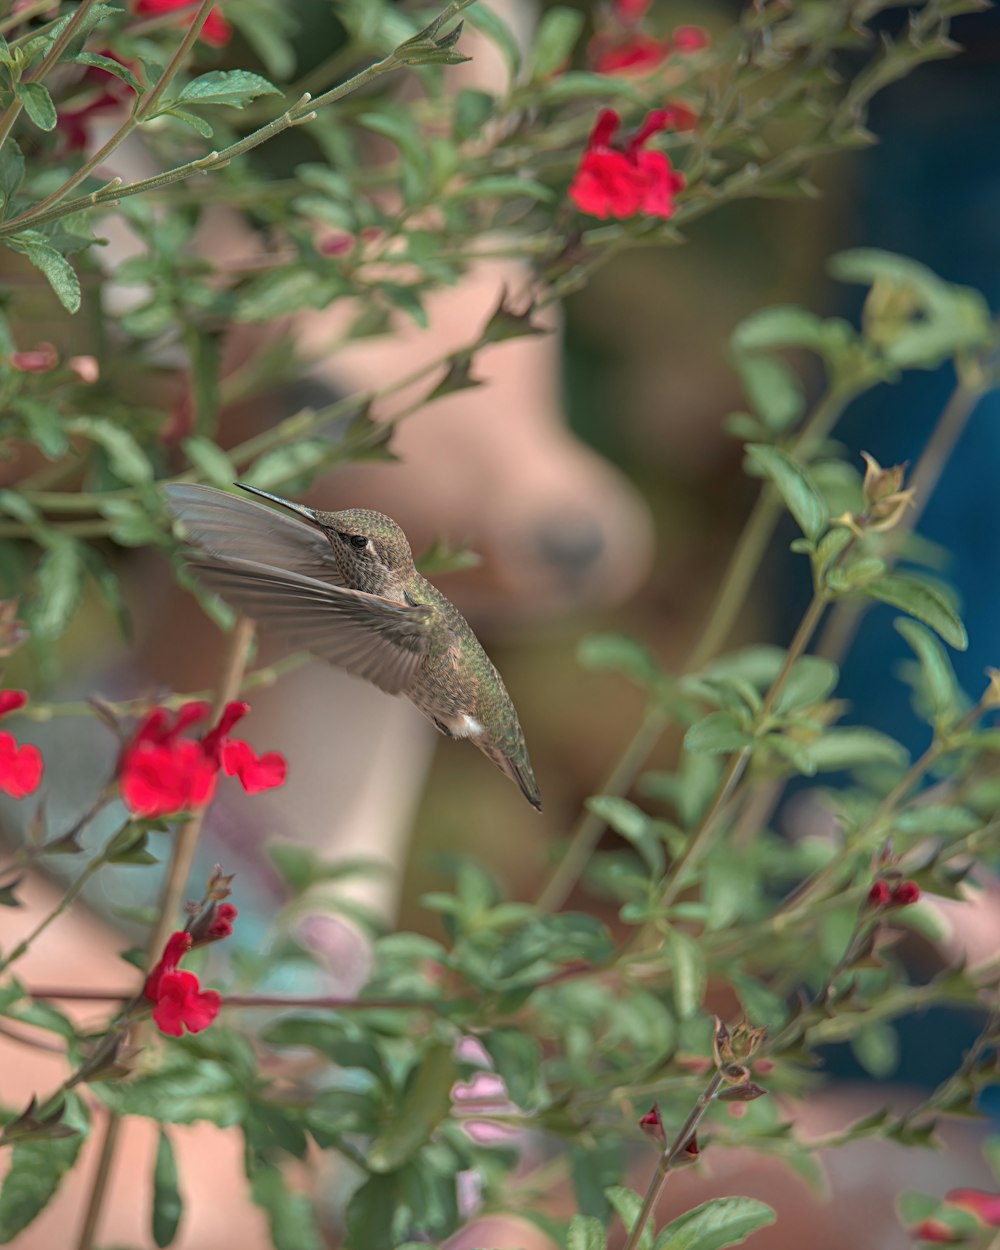 a hummingbird flying over a bush with red flowers